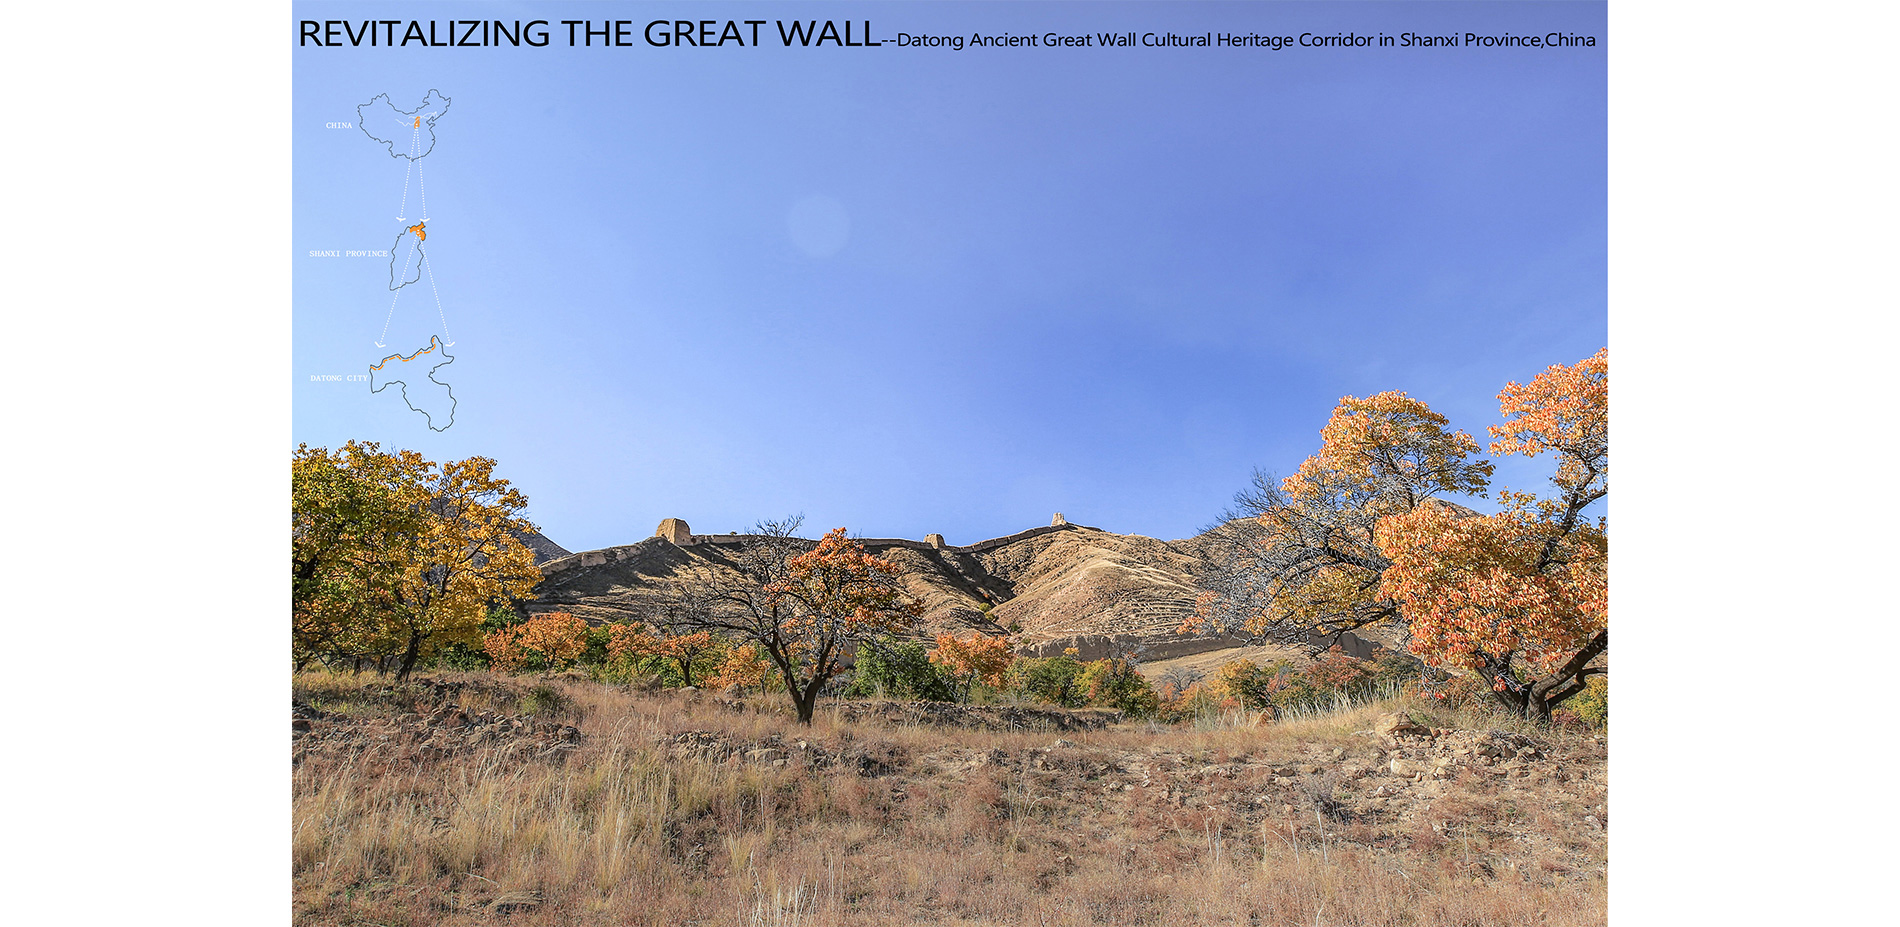 Revitalizing the Great Wall